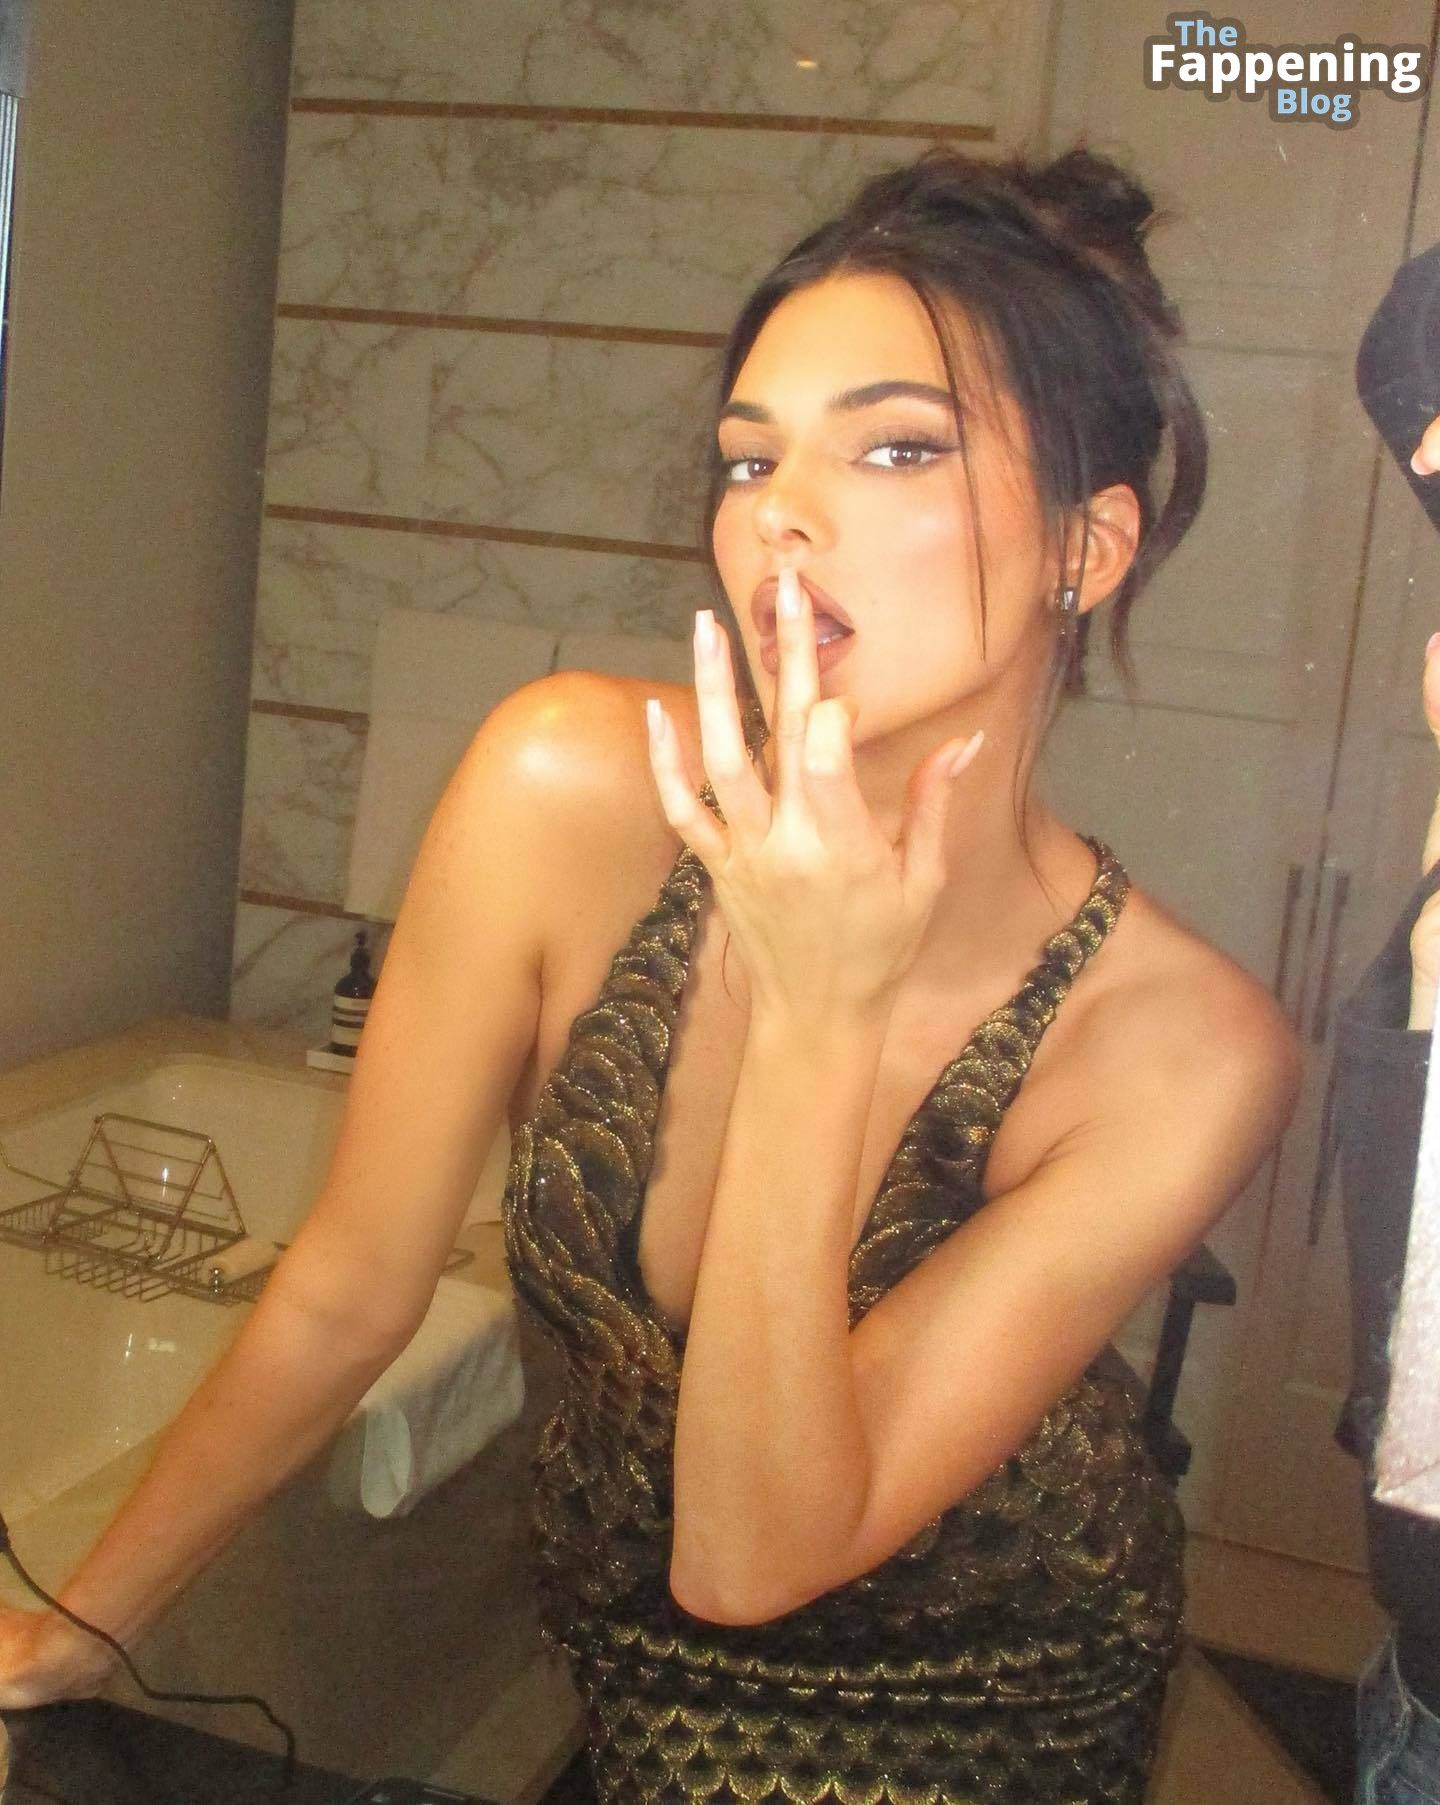 Kendall-Jenner-Sexy-The-Fappening-Blog-1-1.jpg